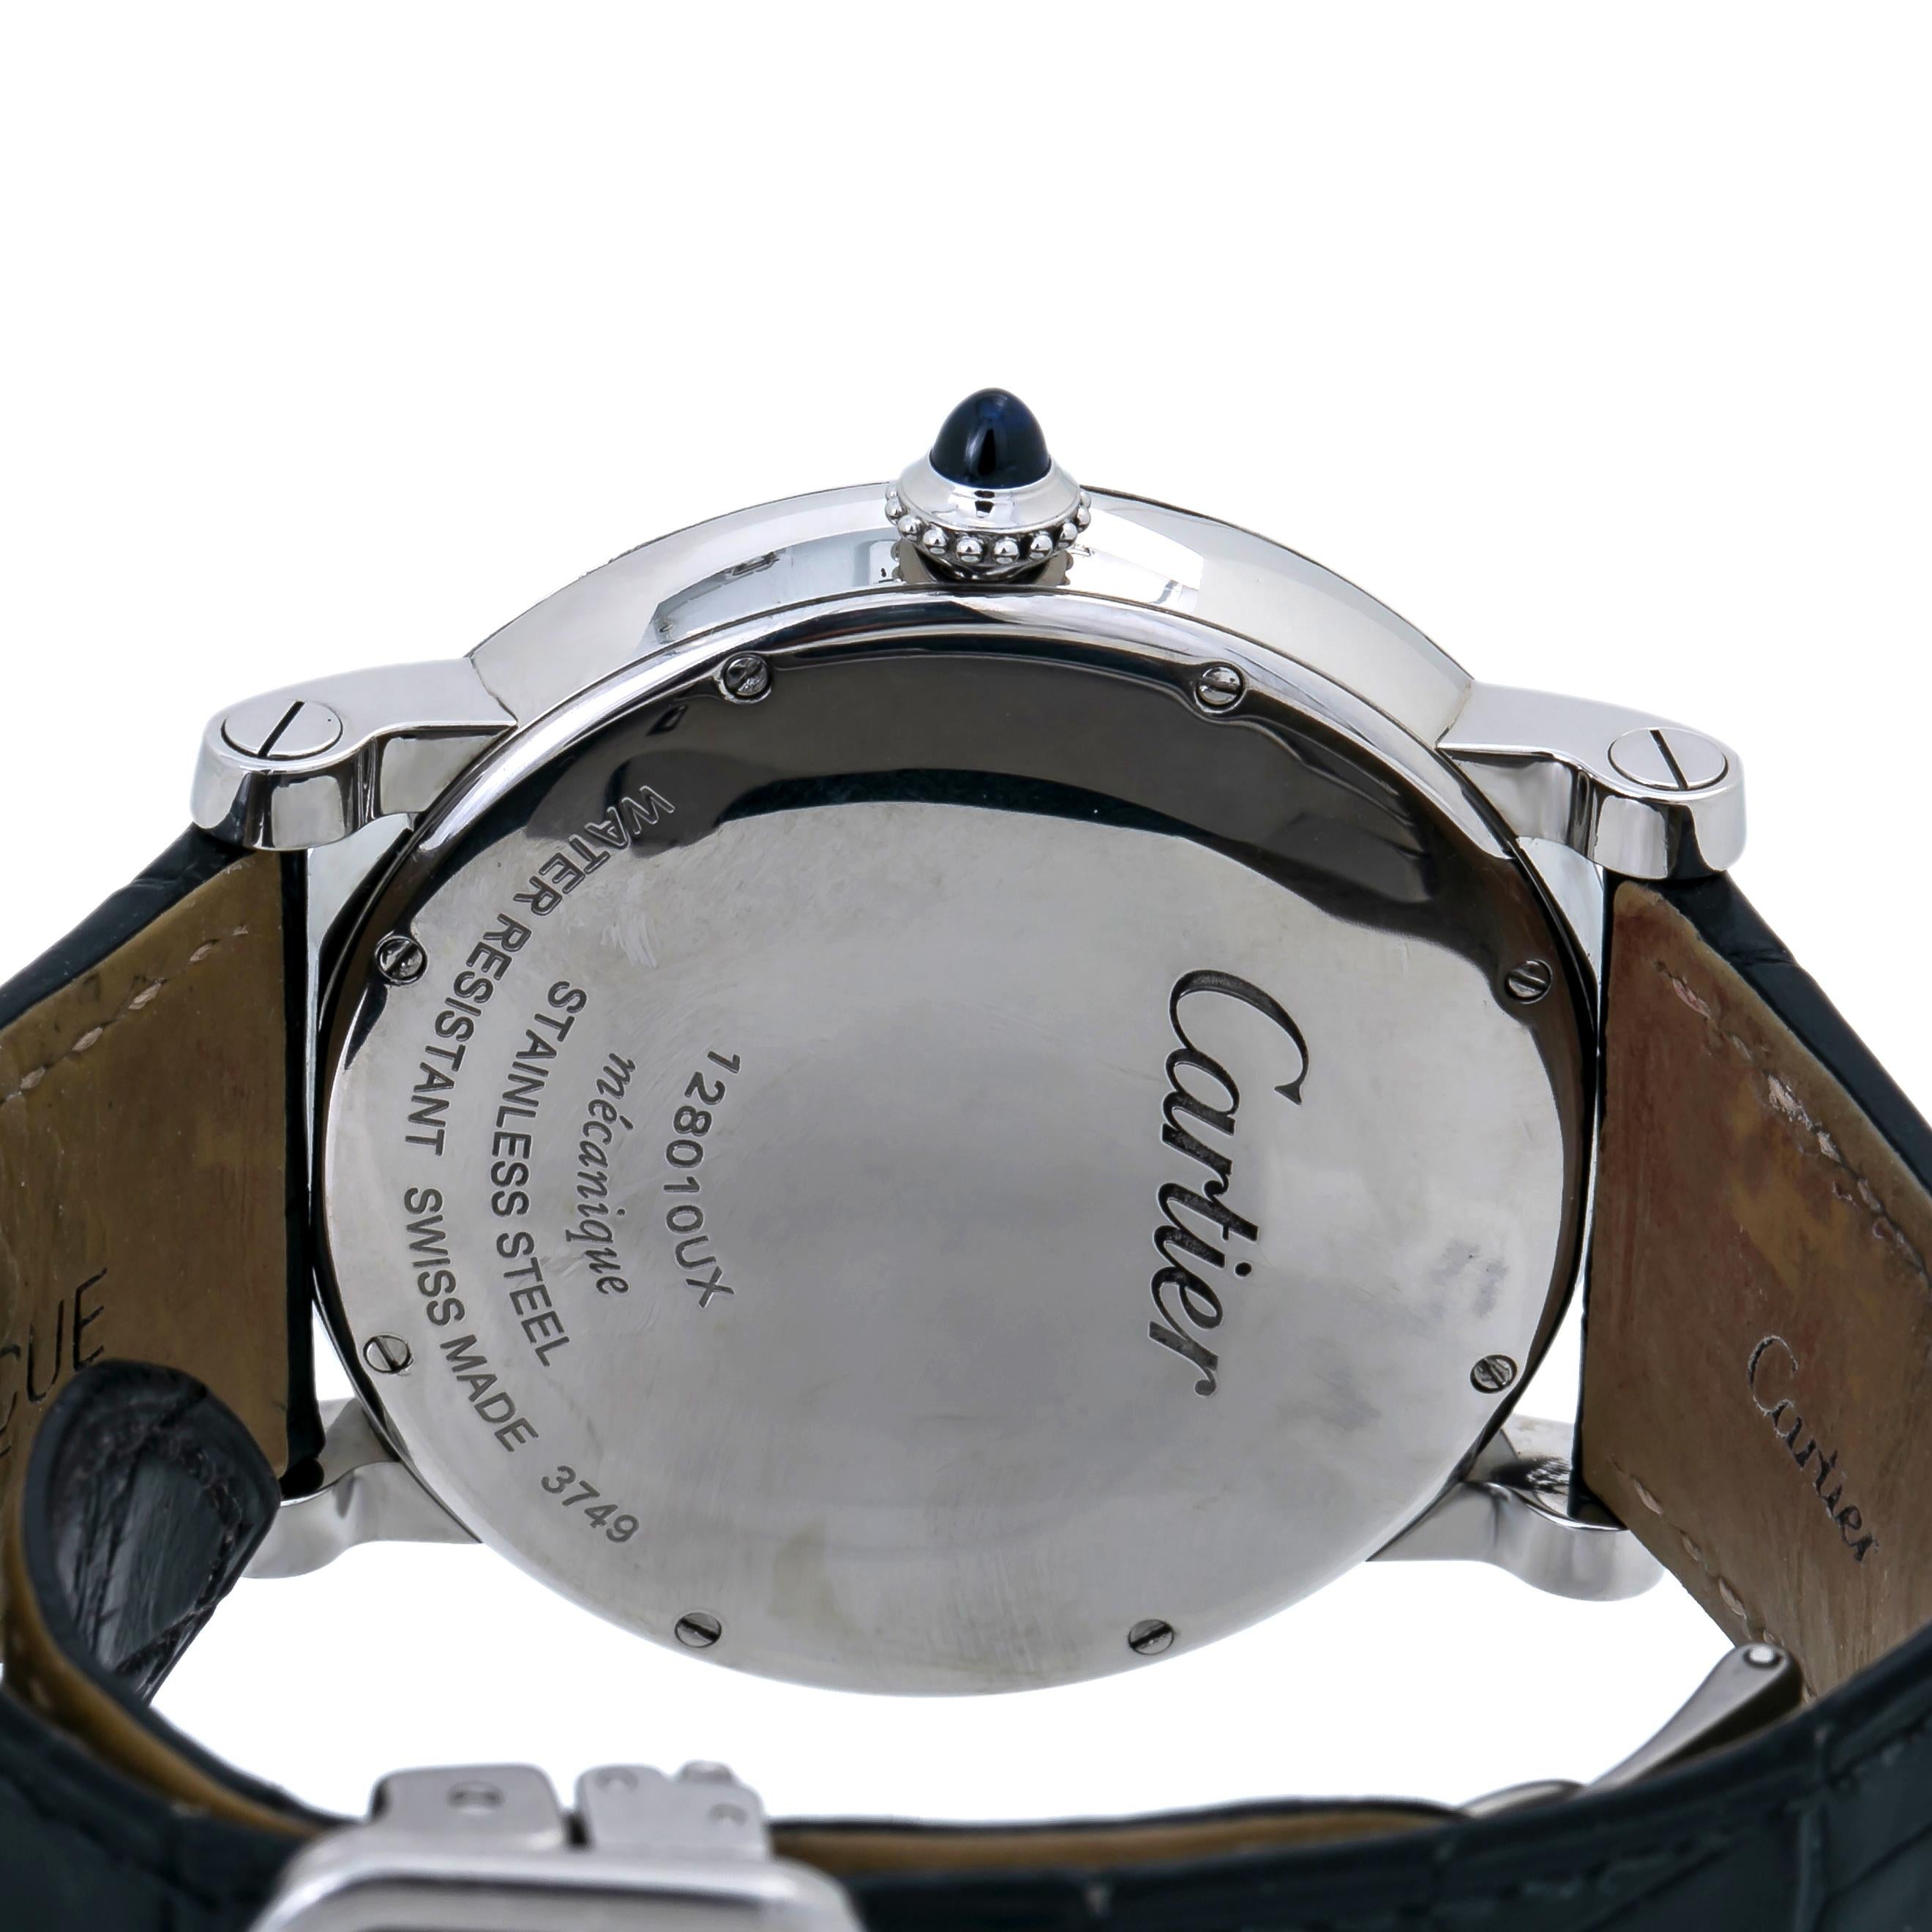 Cartier Rotonde W1556369 Manual Wind Stainless Leather Men's Watch 2